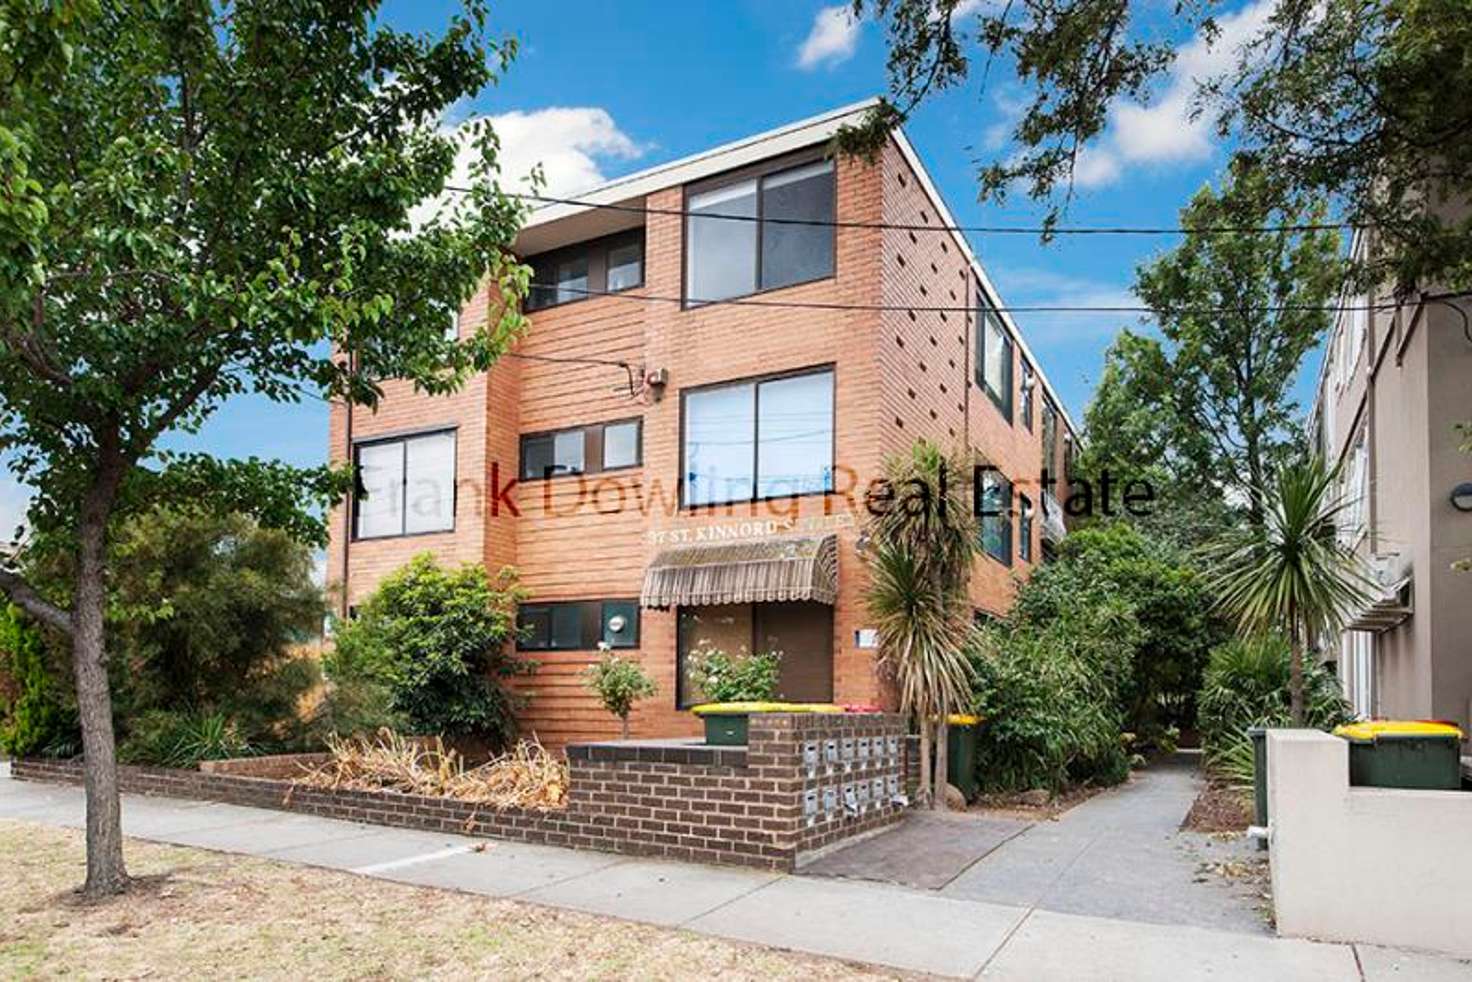 Main view of Homely apartment listing, 3/37 St Kinnord Street, Essendon VIC 3040